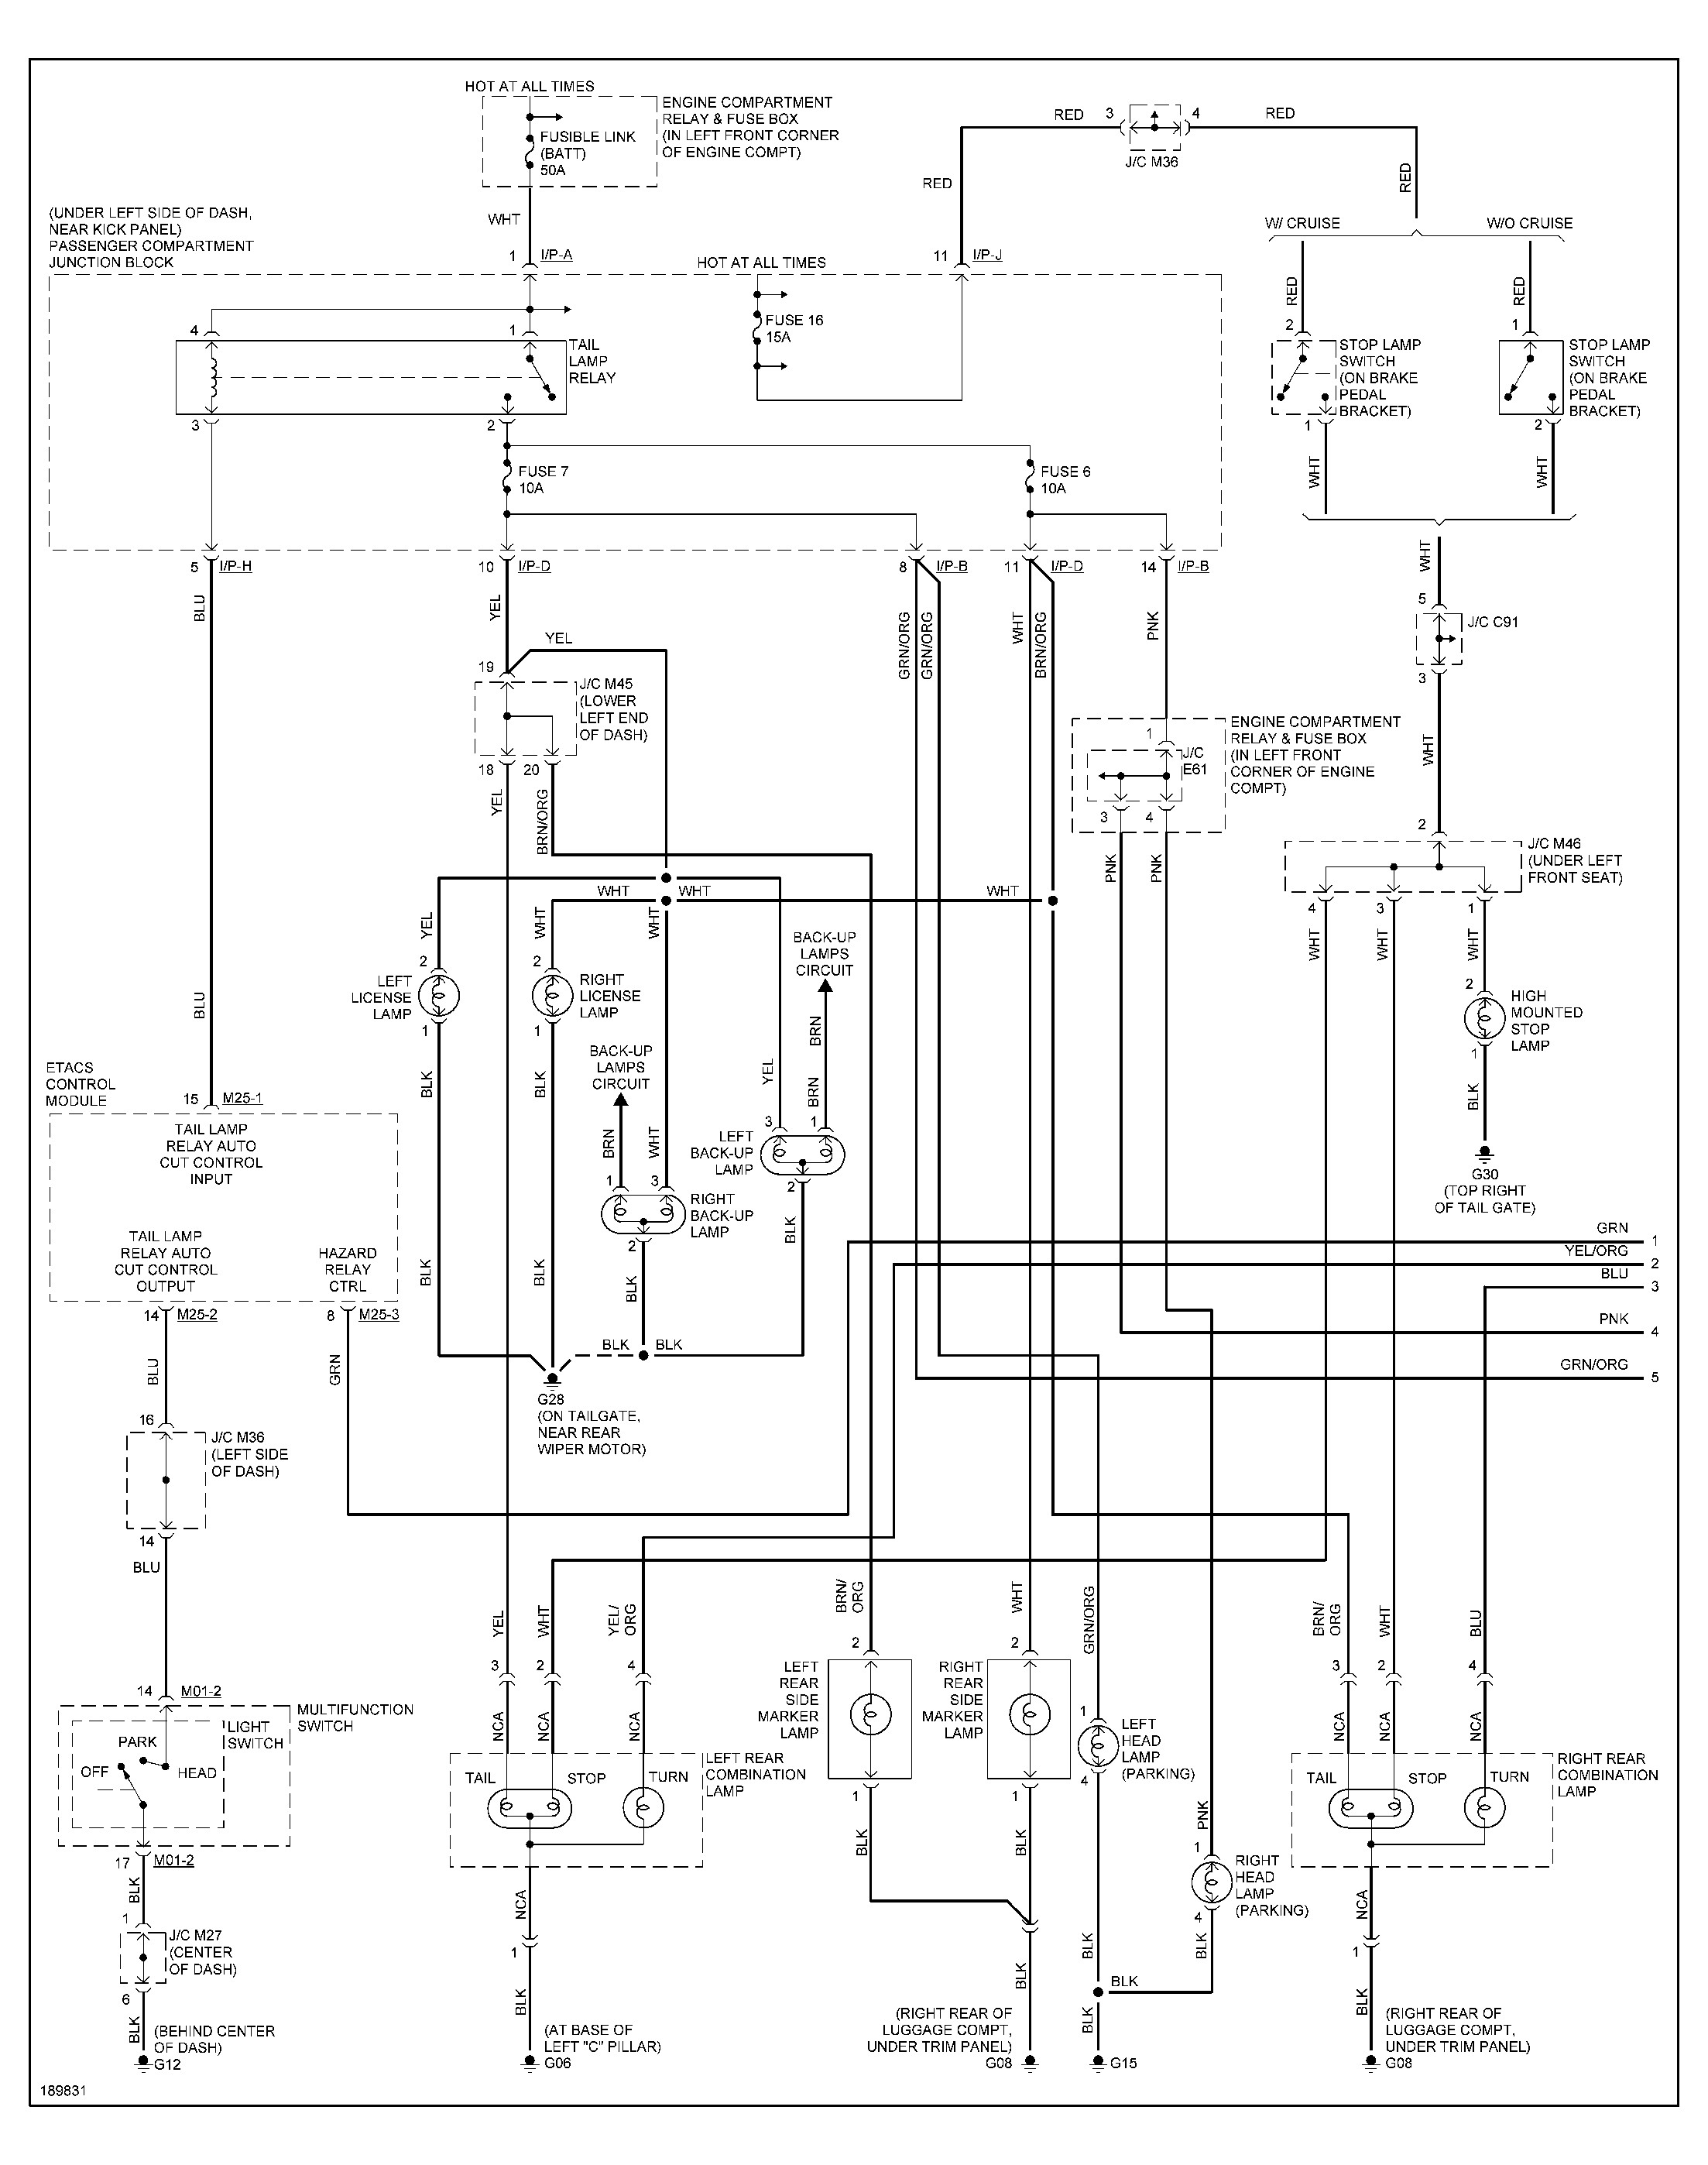 2010 Chrysler town and Country Cooling Wiring Diagram Diagram] 2010 Hyundai sonata Wiring Diagram Full Version Hd Of 2010 Chrysler town and Country Cooling Wiring Diagram